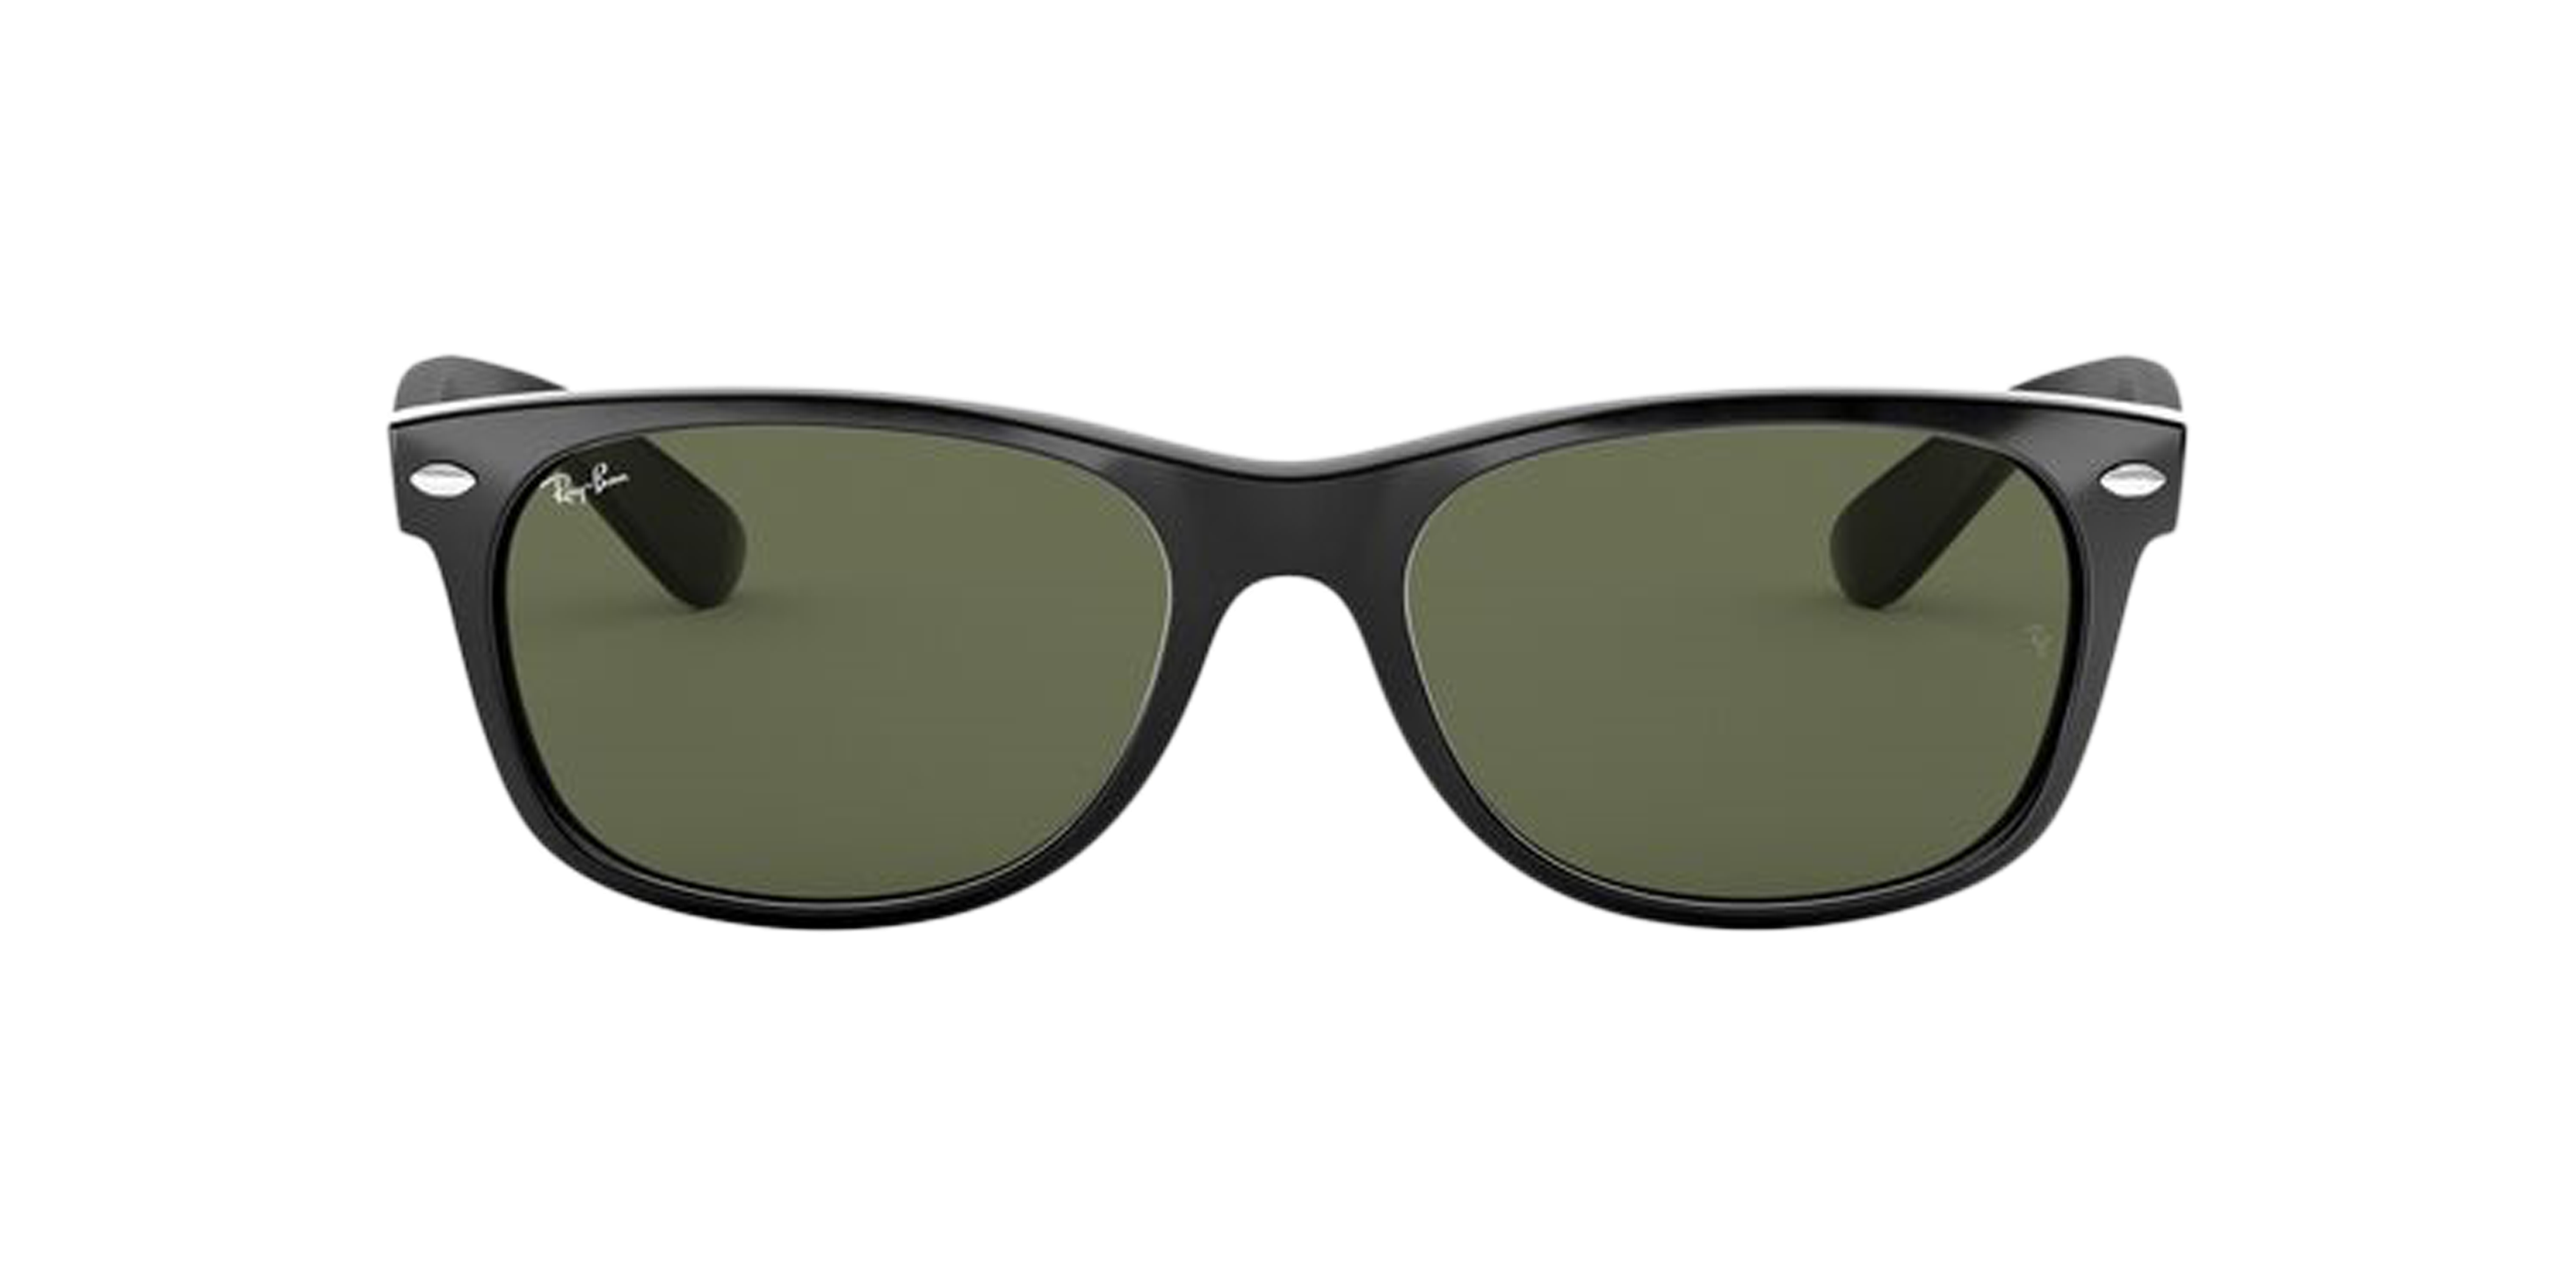 [products.image.front] Ray-Ban New Wayfarer Classic RB2132 901